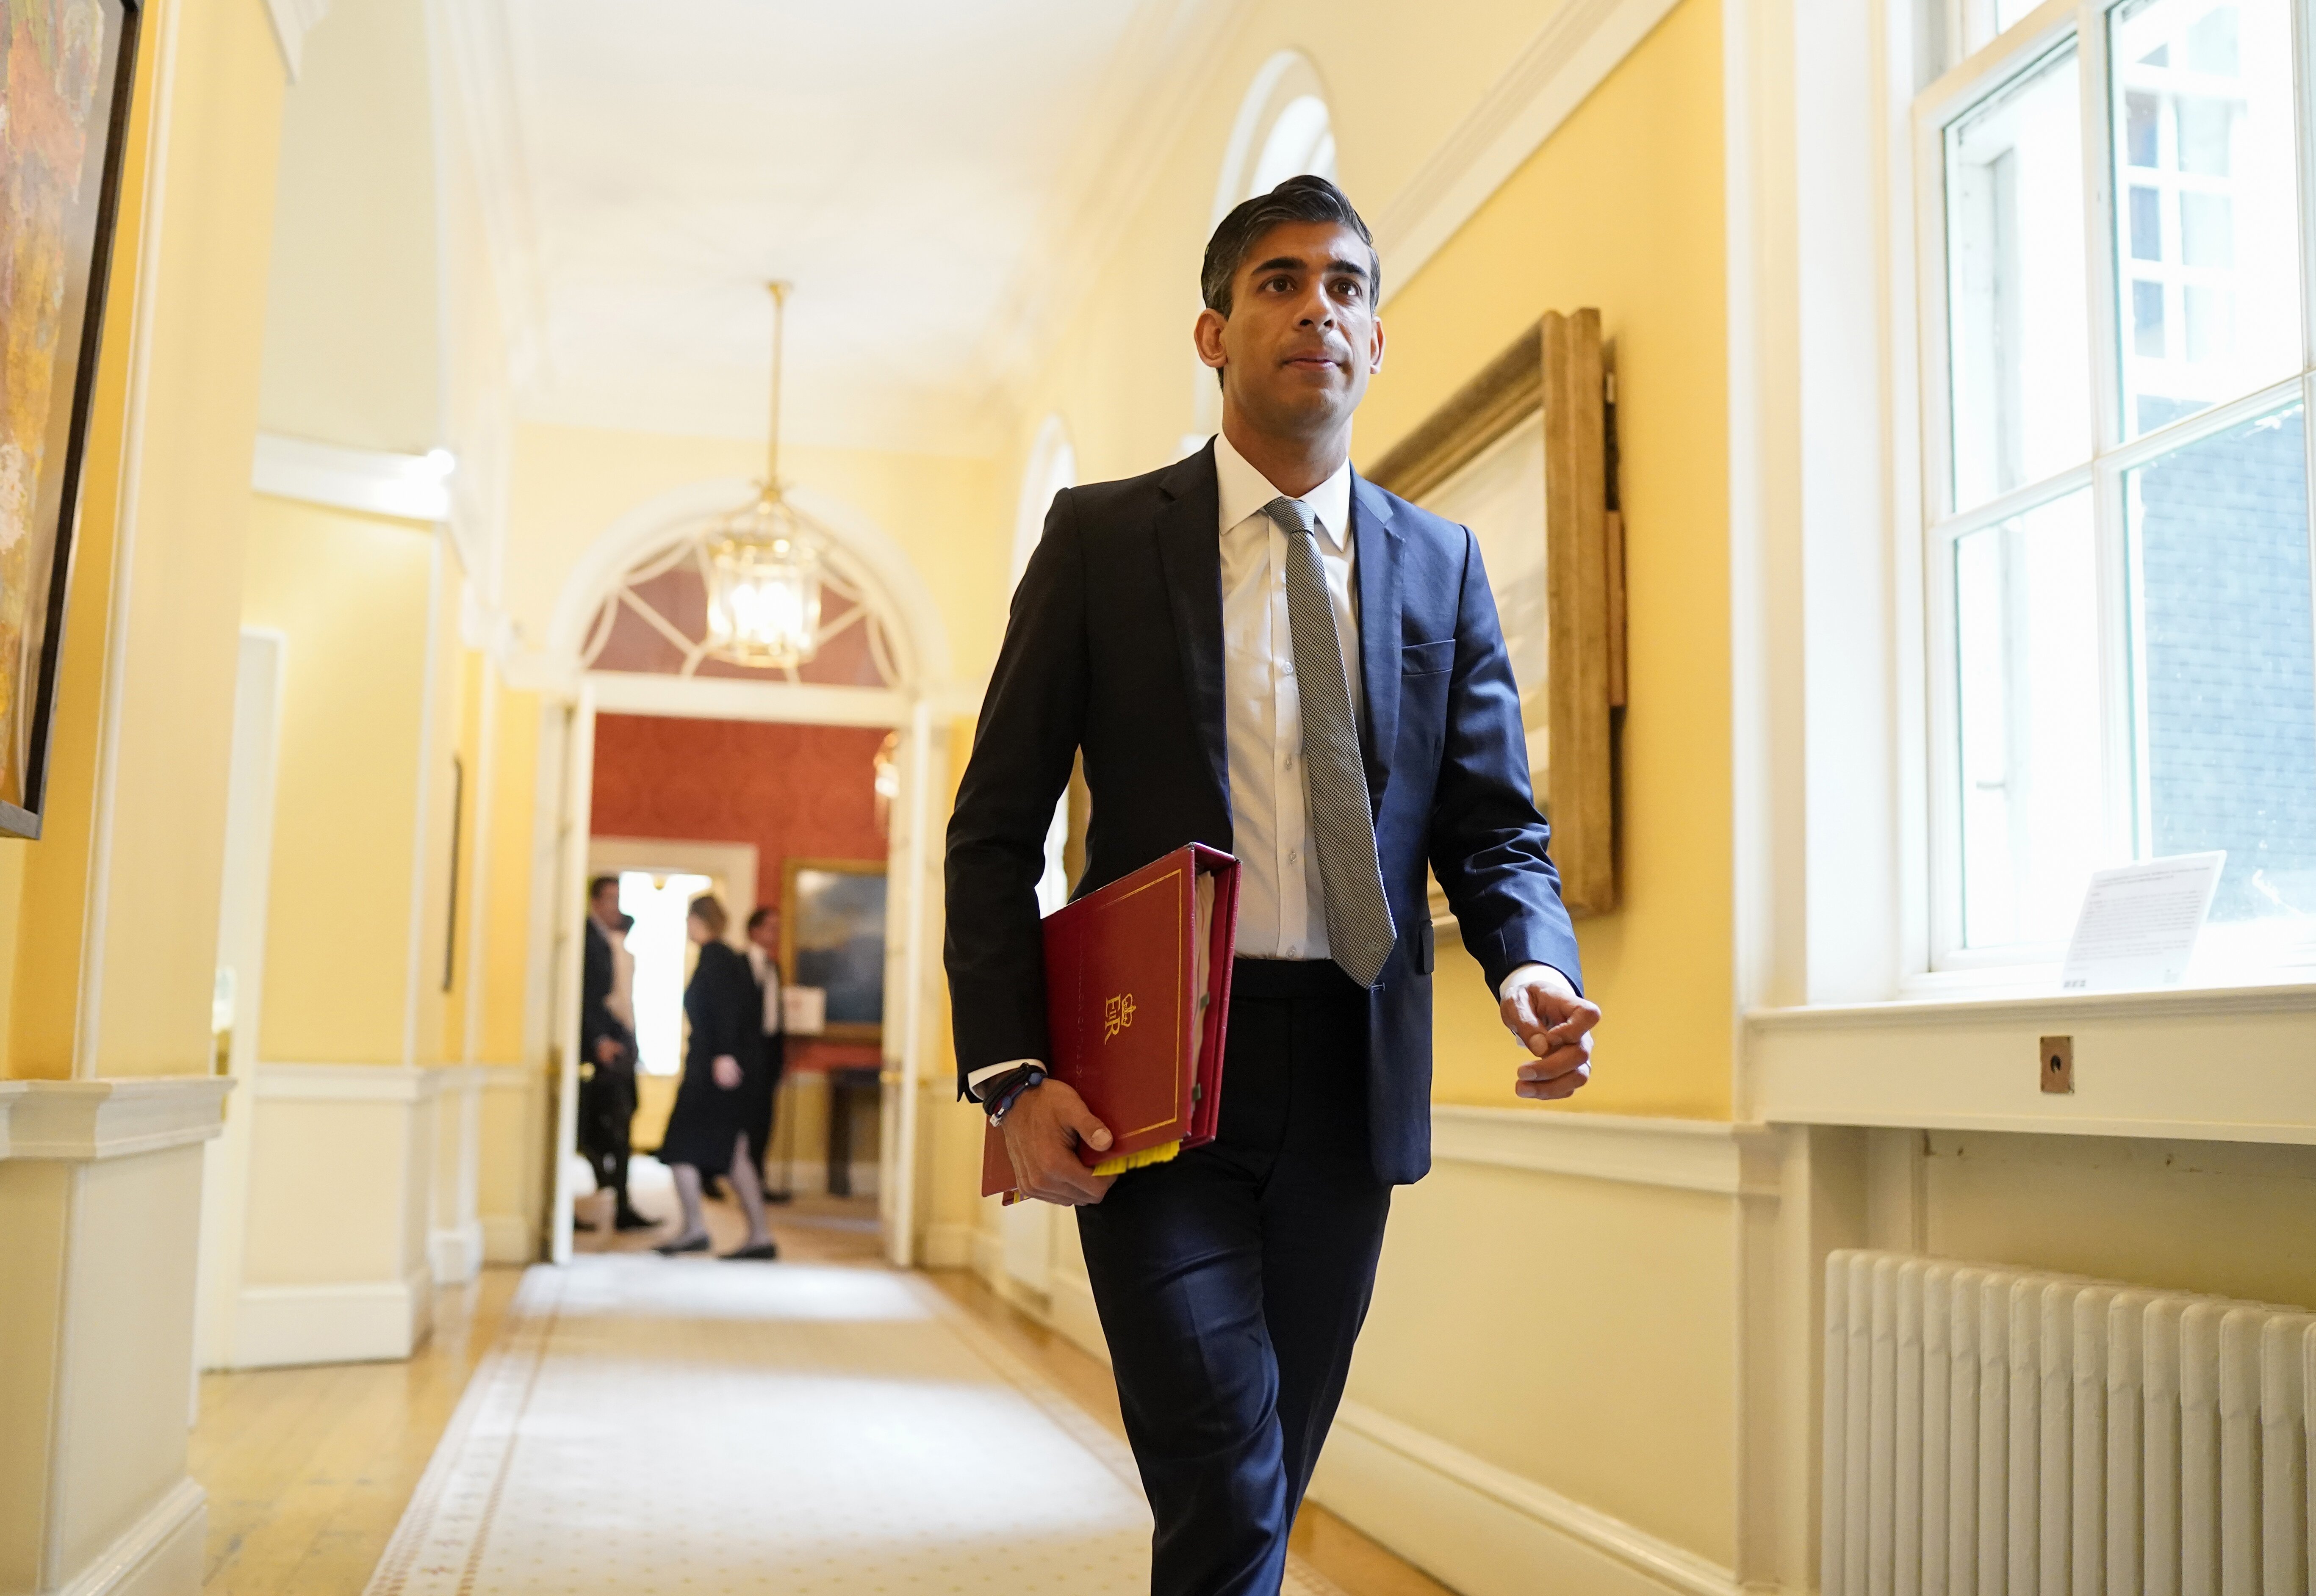 Six things to look out for in Rishi Sunak’s Budget today for hospitality